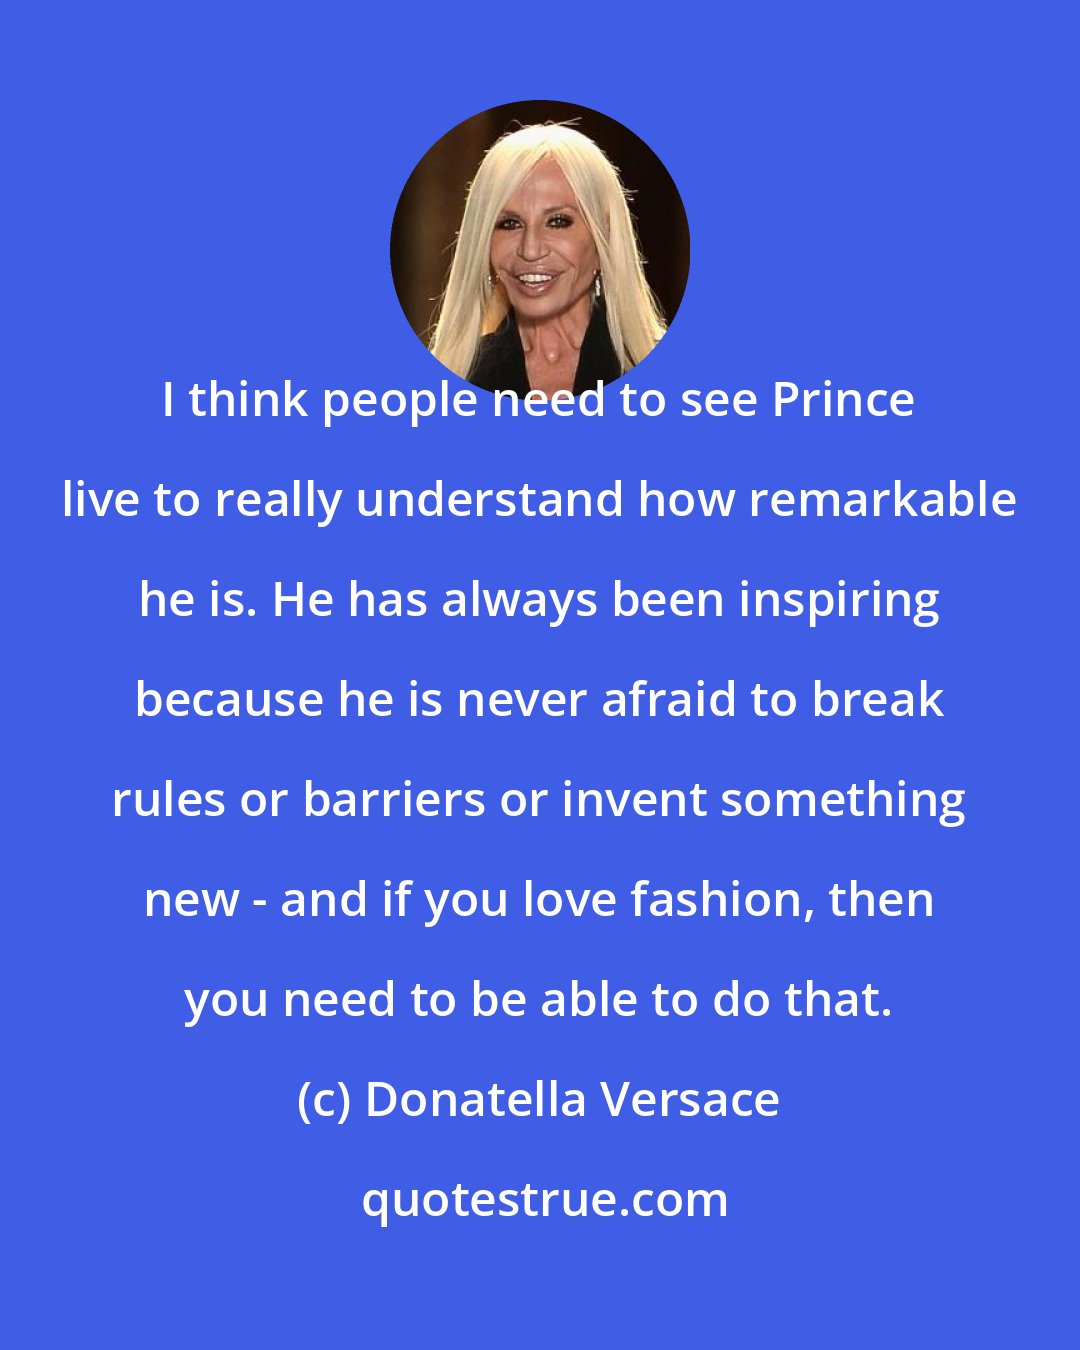 Donatella Versace: I think people need to see Prince live to really understand how remarkable he is. He has always been inspiring because he is never afraid to break rules or barriers or invent something new - and if you love fashion, then you need to be able to do that.